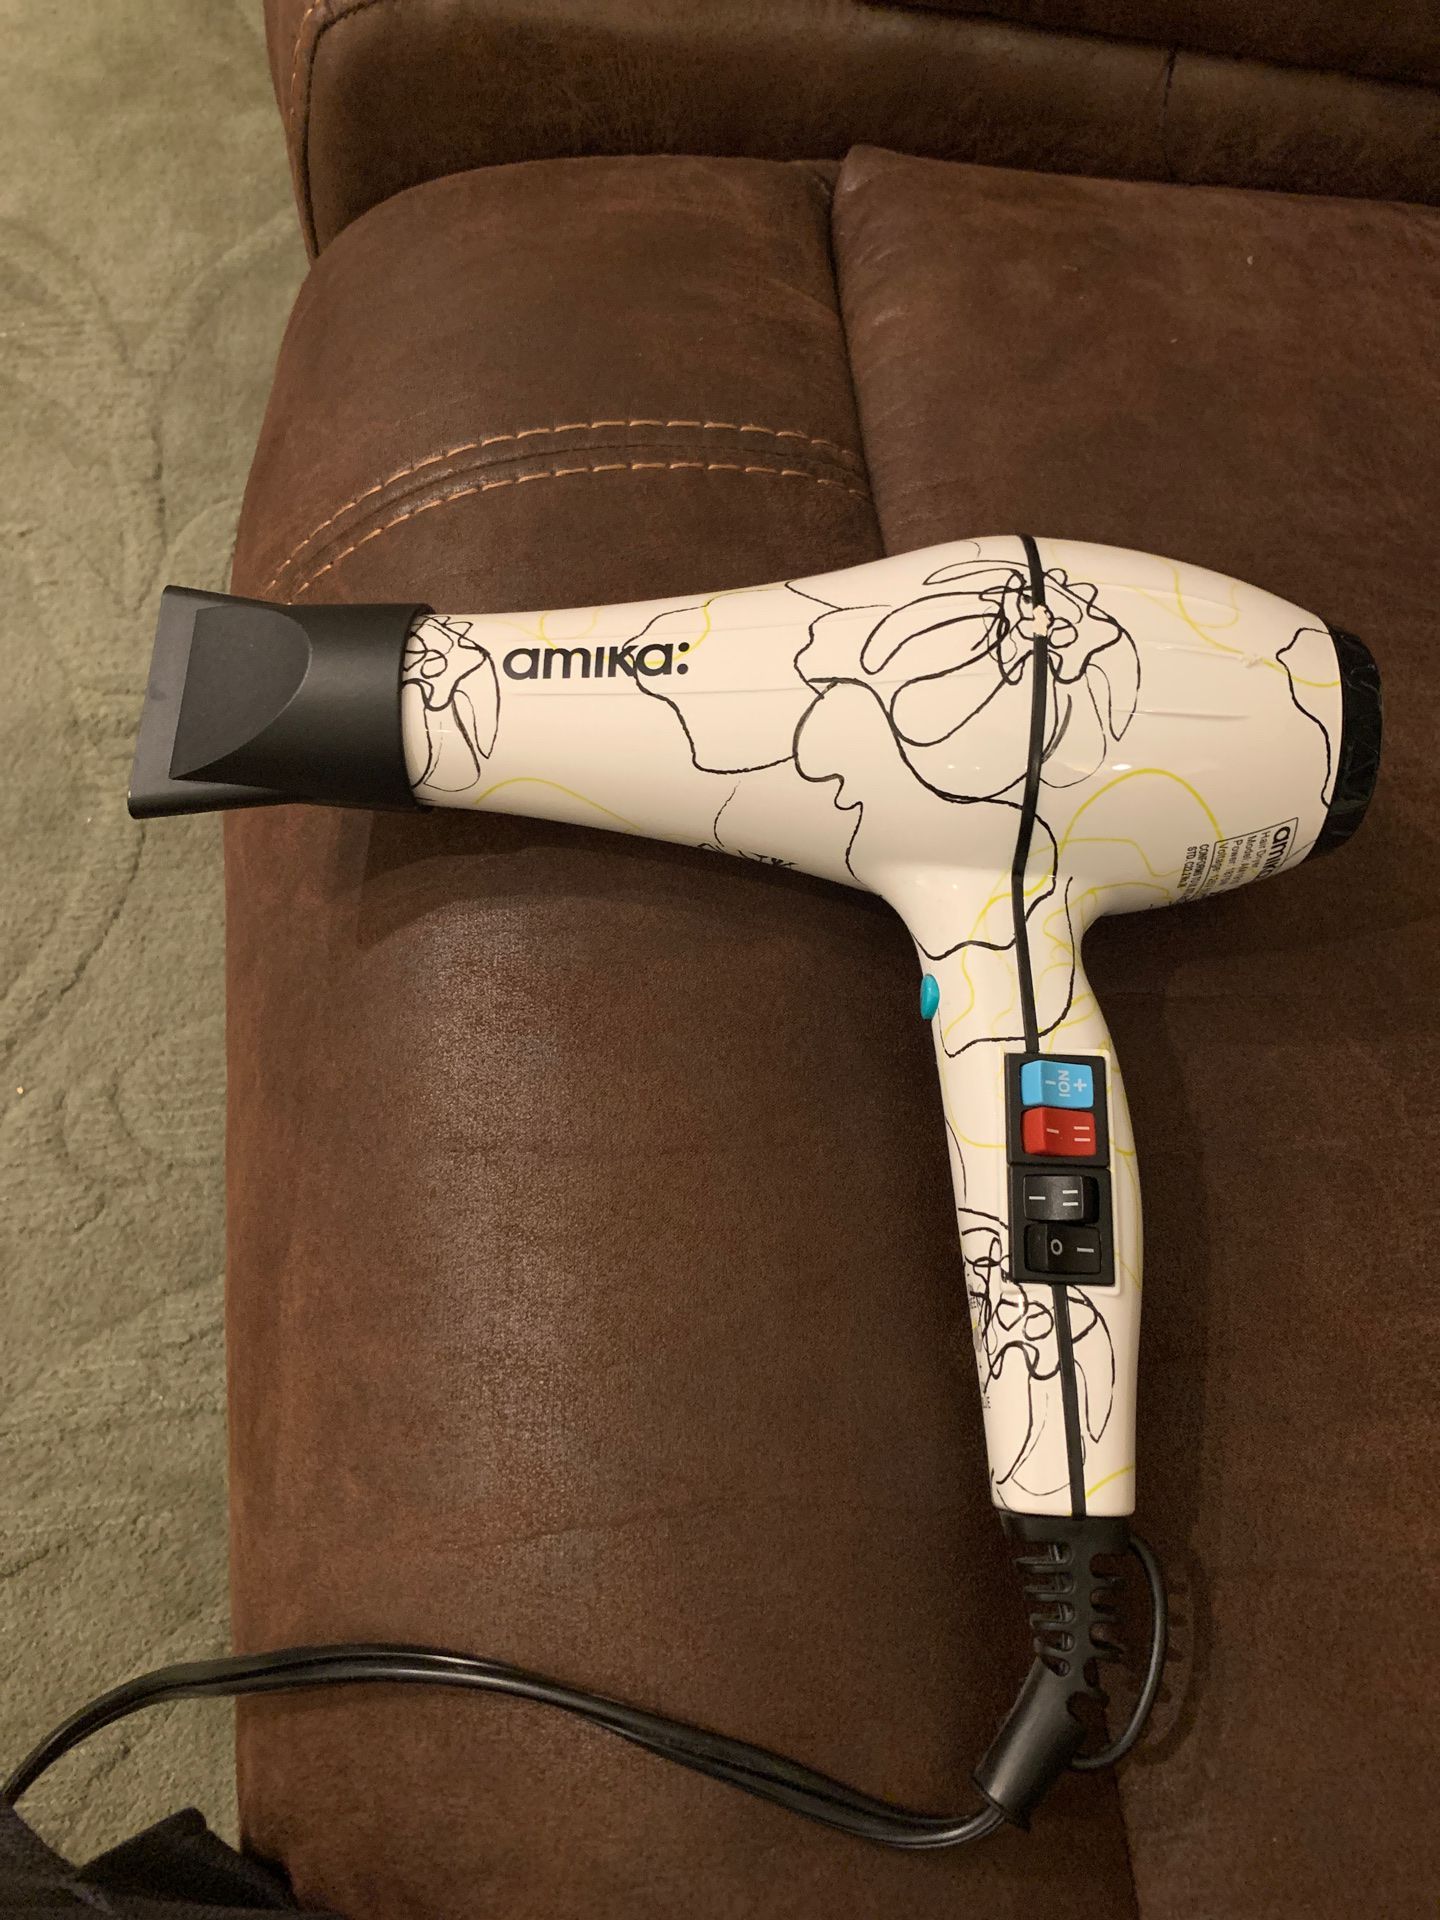 Amika: hair dryer never used ($200 when new) 1875watts